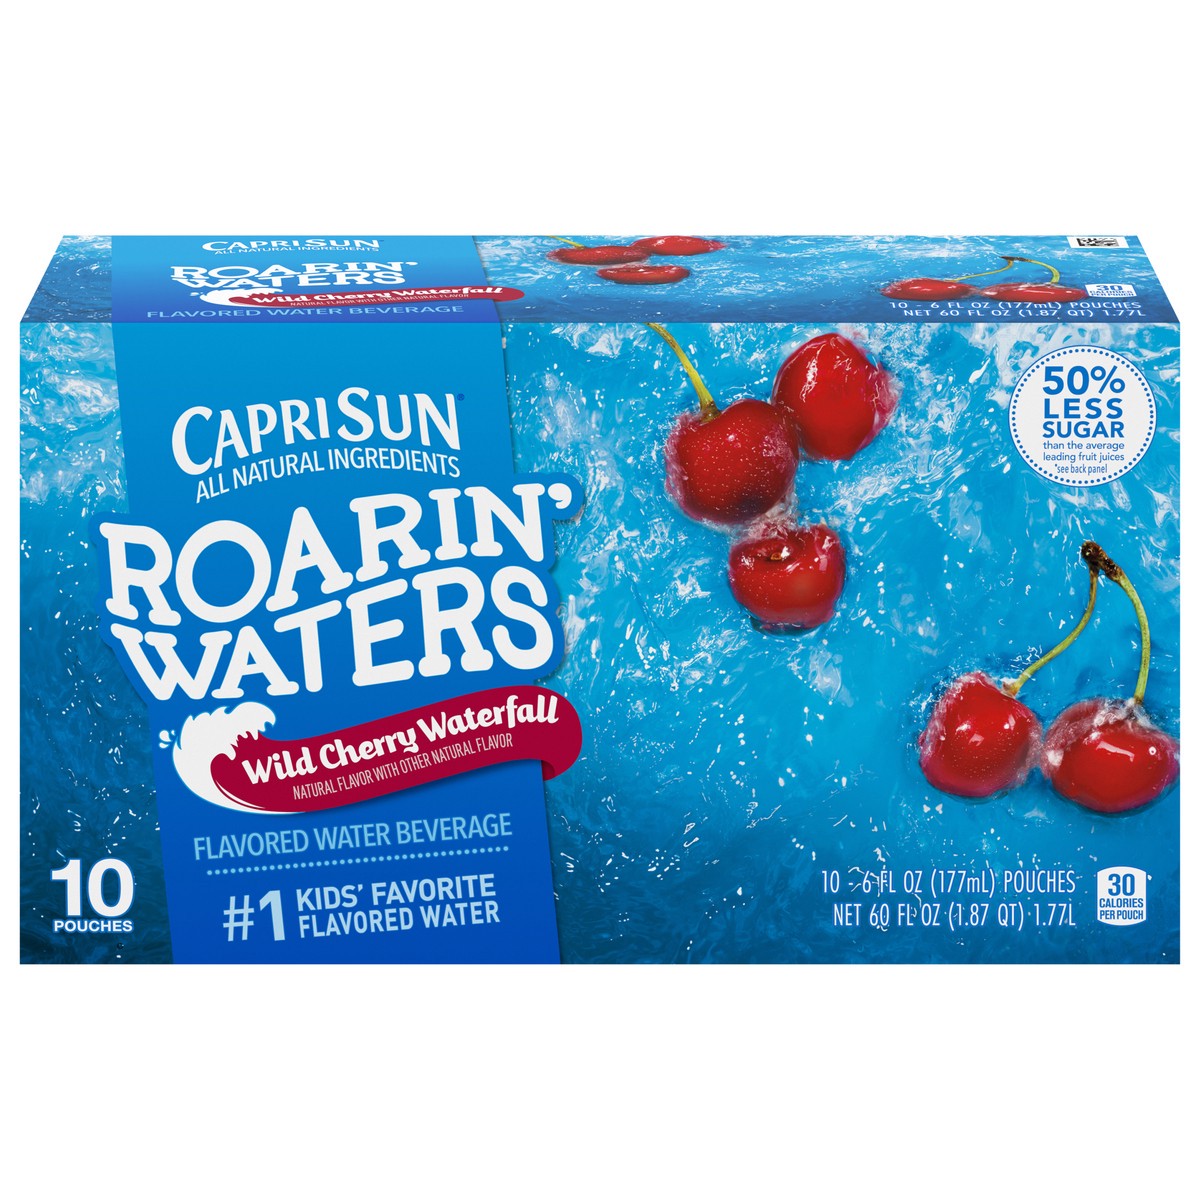 slide 1 of 22, Capri Sun Roarin' Waters Wild Cherry Flavored with other natural flavor Water Beverage, 10 ct Box, 6 fl oz Drink Pouches, 